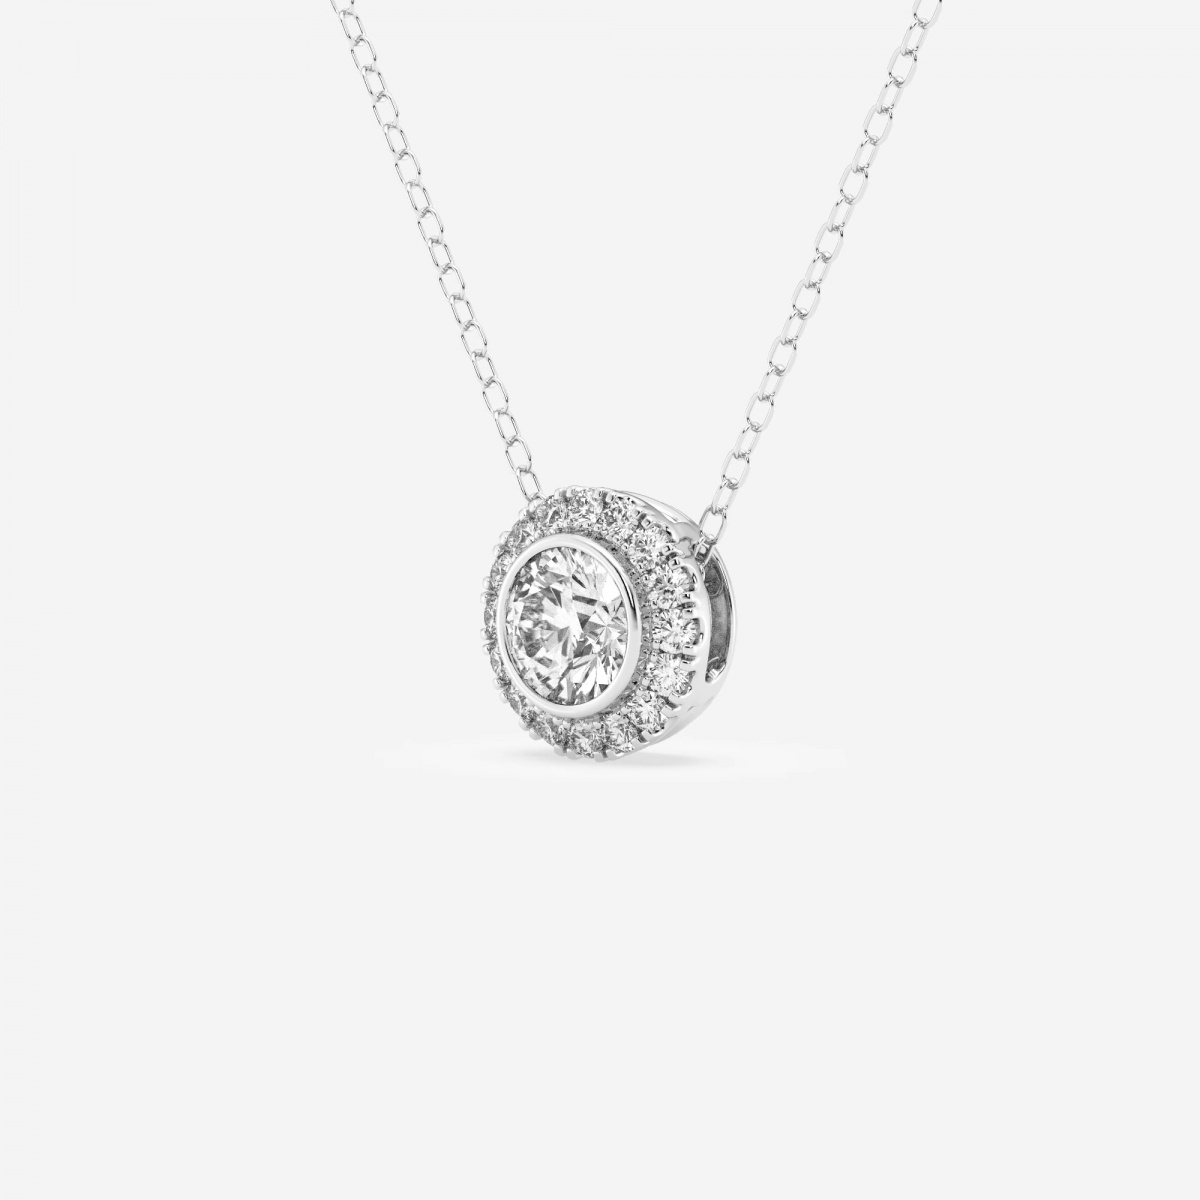 Additional Image 1 for  5/8 ctw Round Lab Grown Diamond Bezel Set Halo Pendant with Adjustable Chain